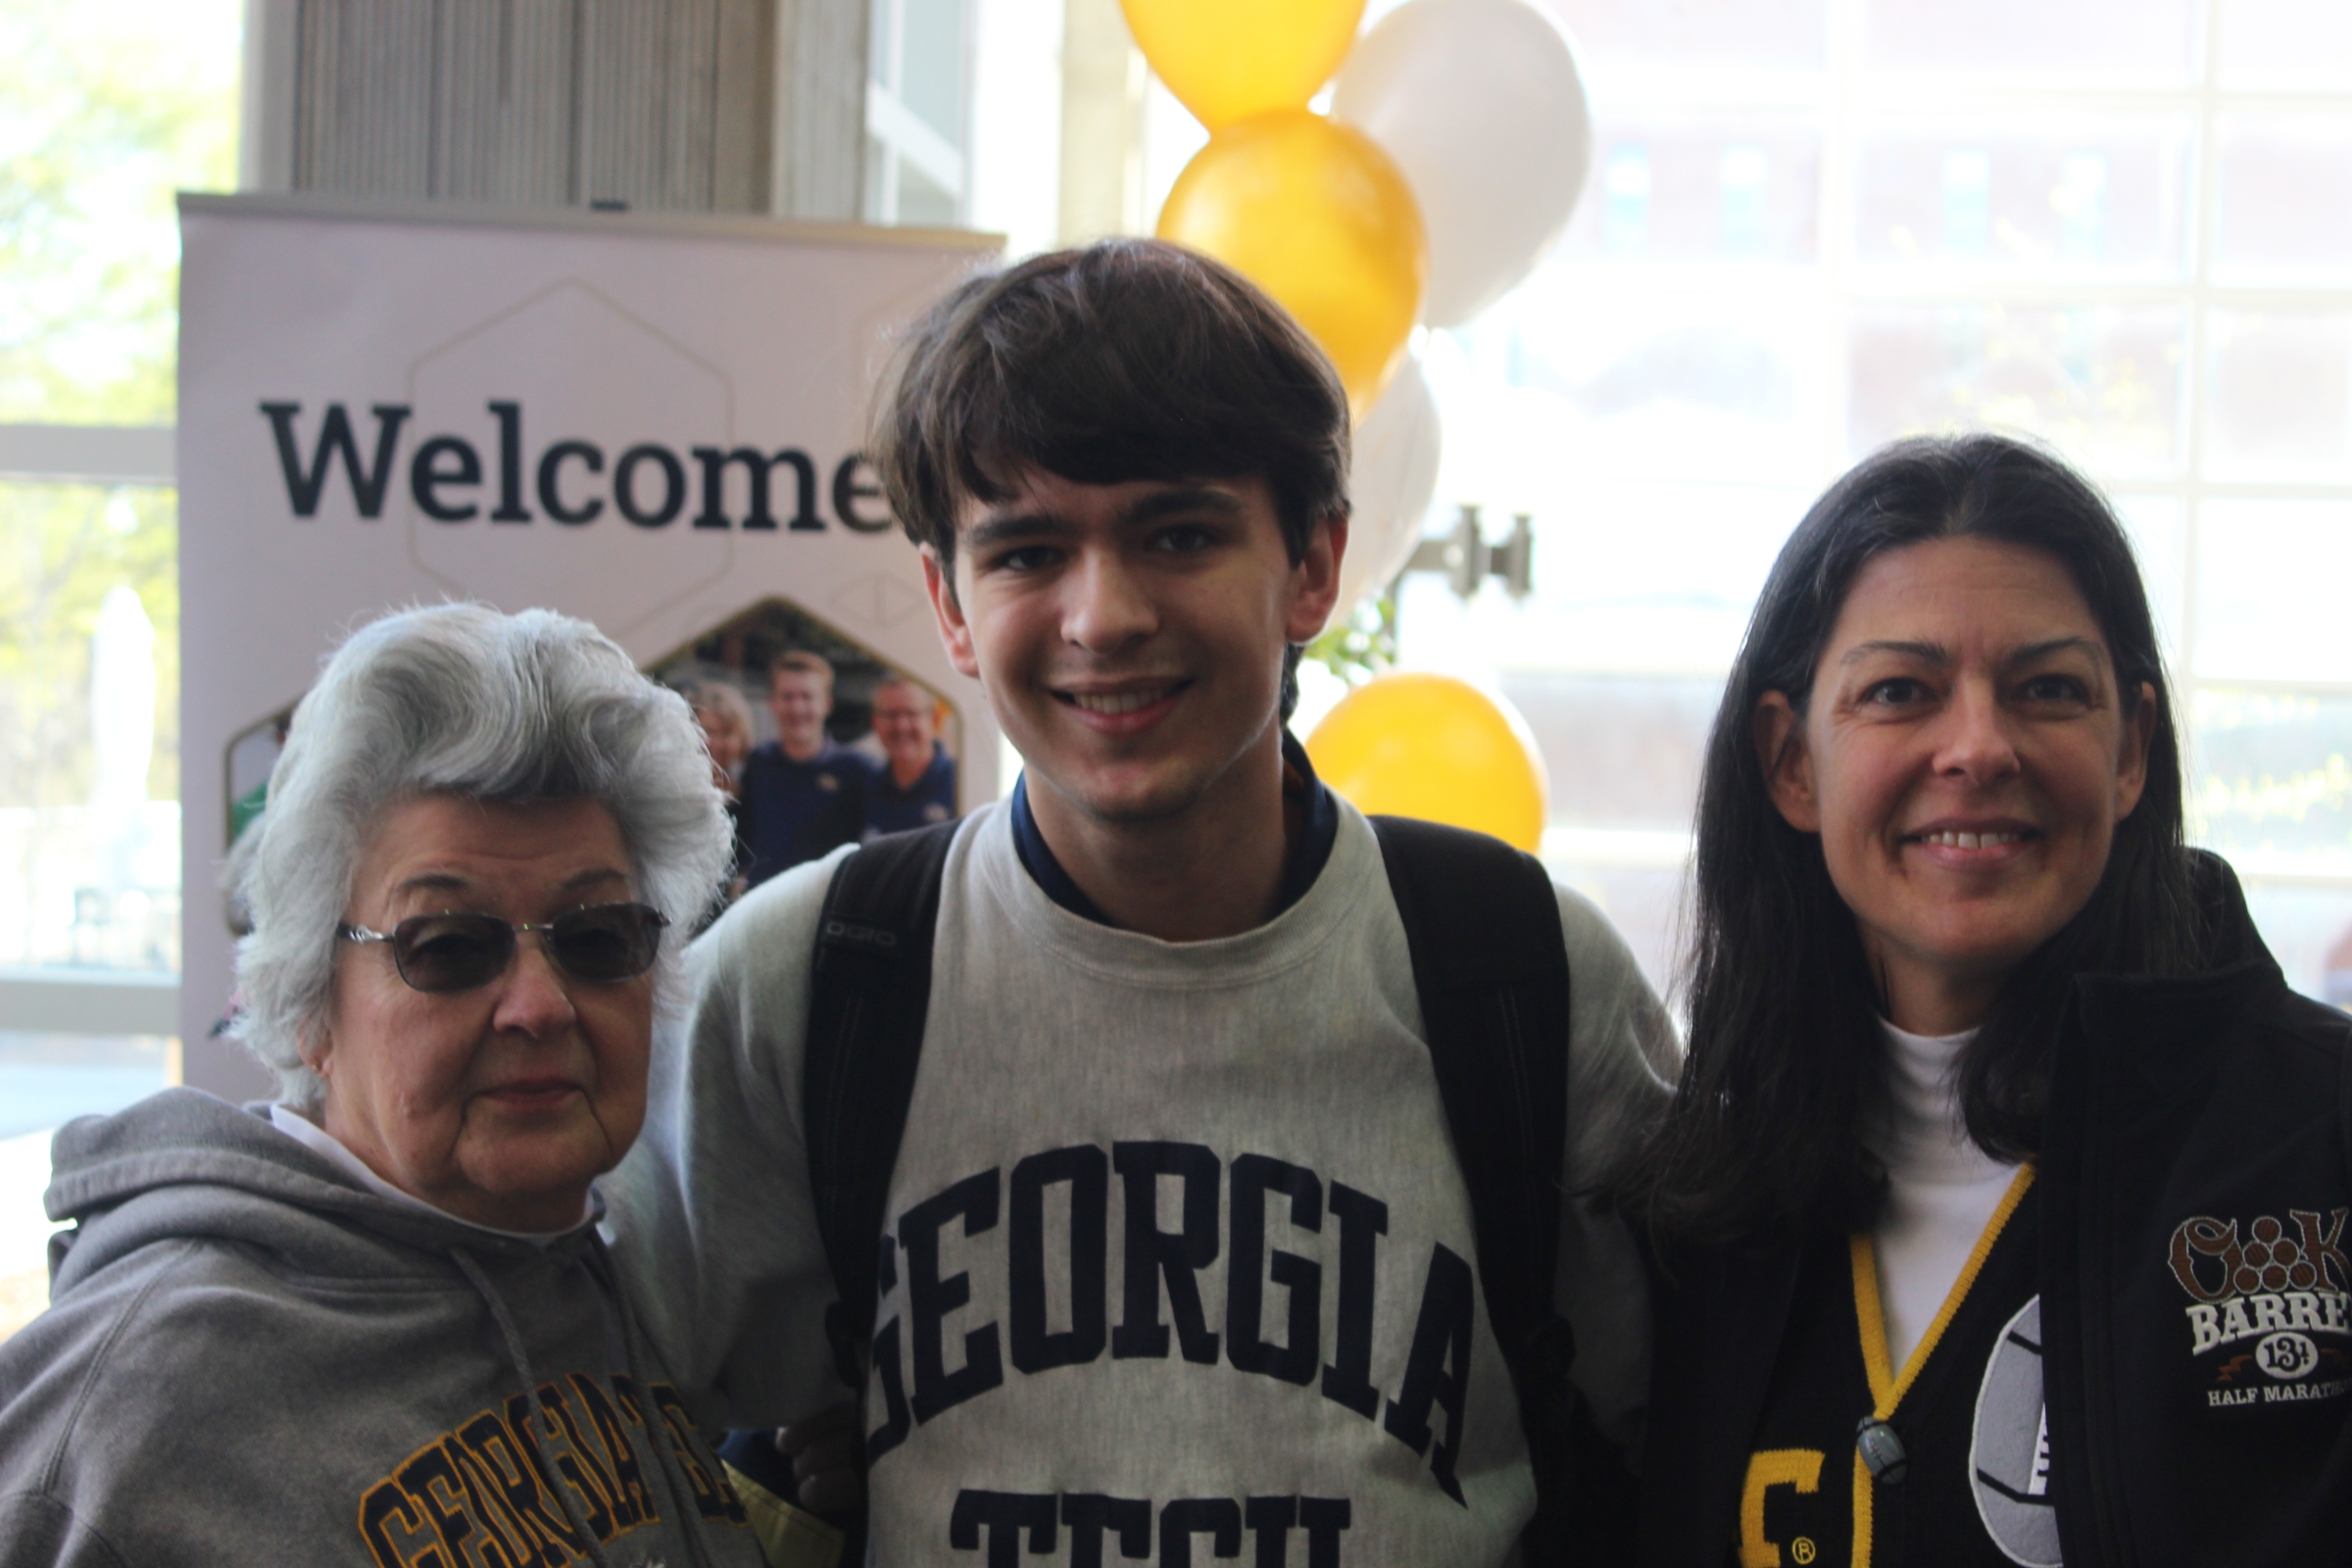 A woman with short grey hair stands next to a young man wearing a Georgia Tech sweatshirt, next to whom is a woman with dark hair.